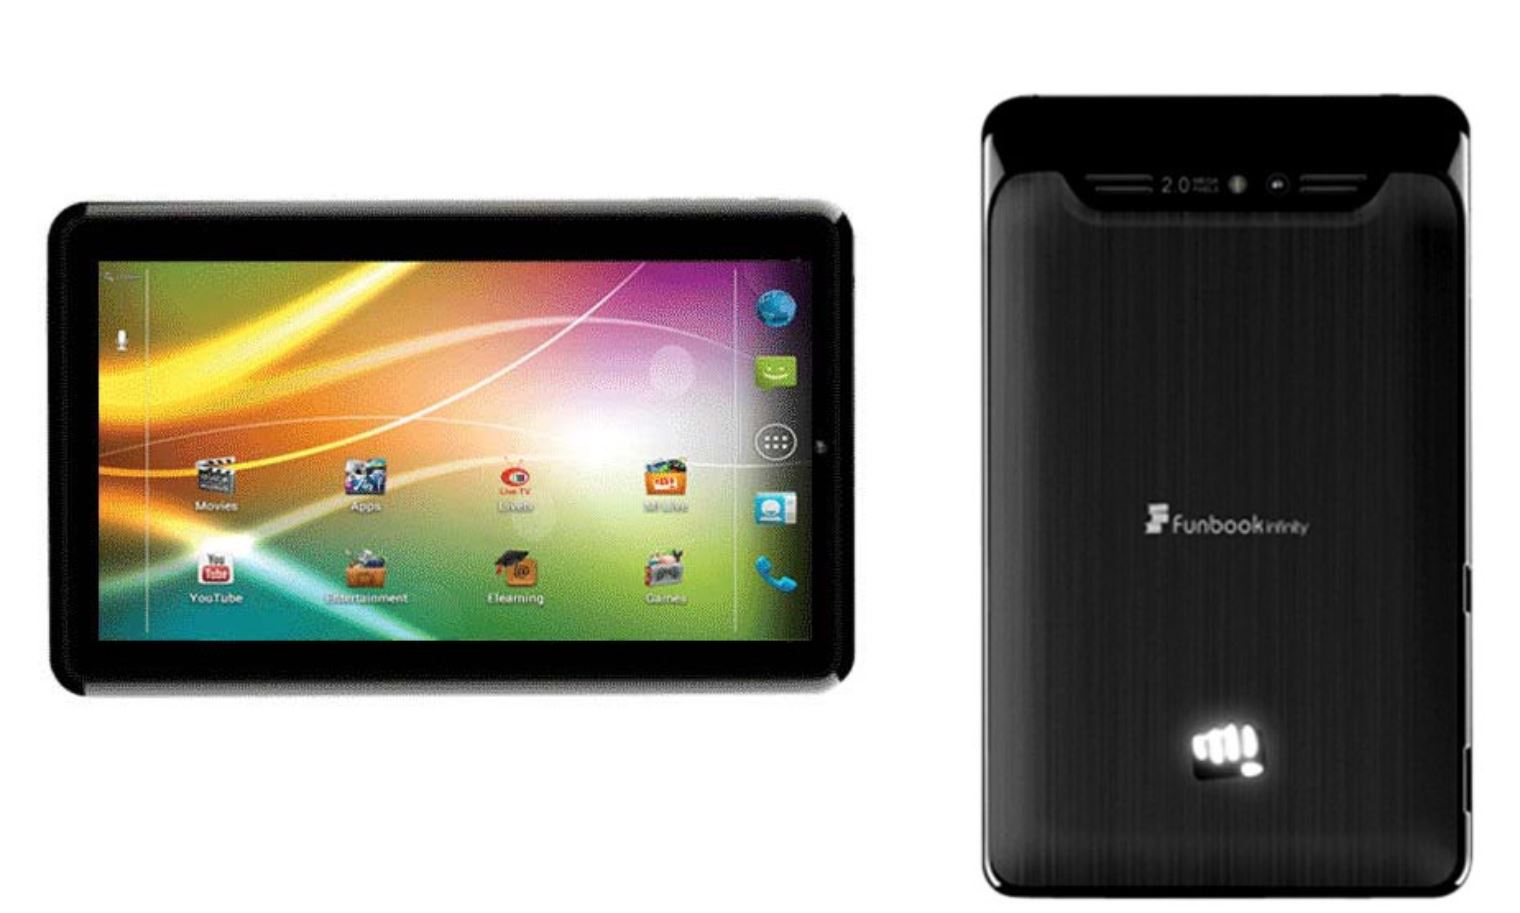 Micromax Funbook P600 Tablet Specification, Price - 3G, Voice Calling